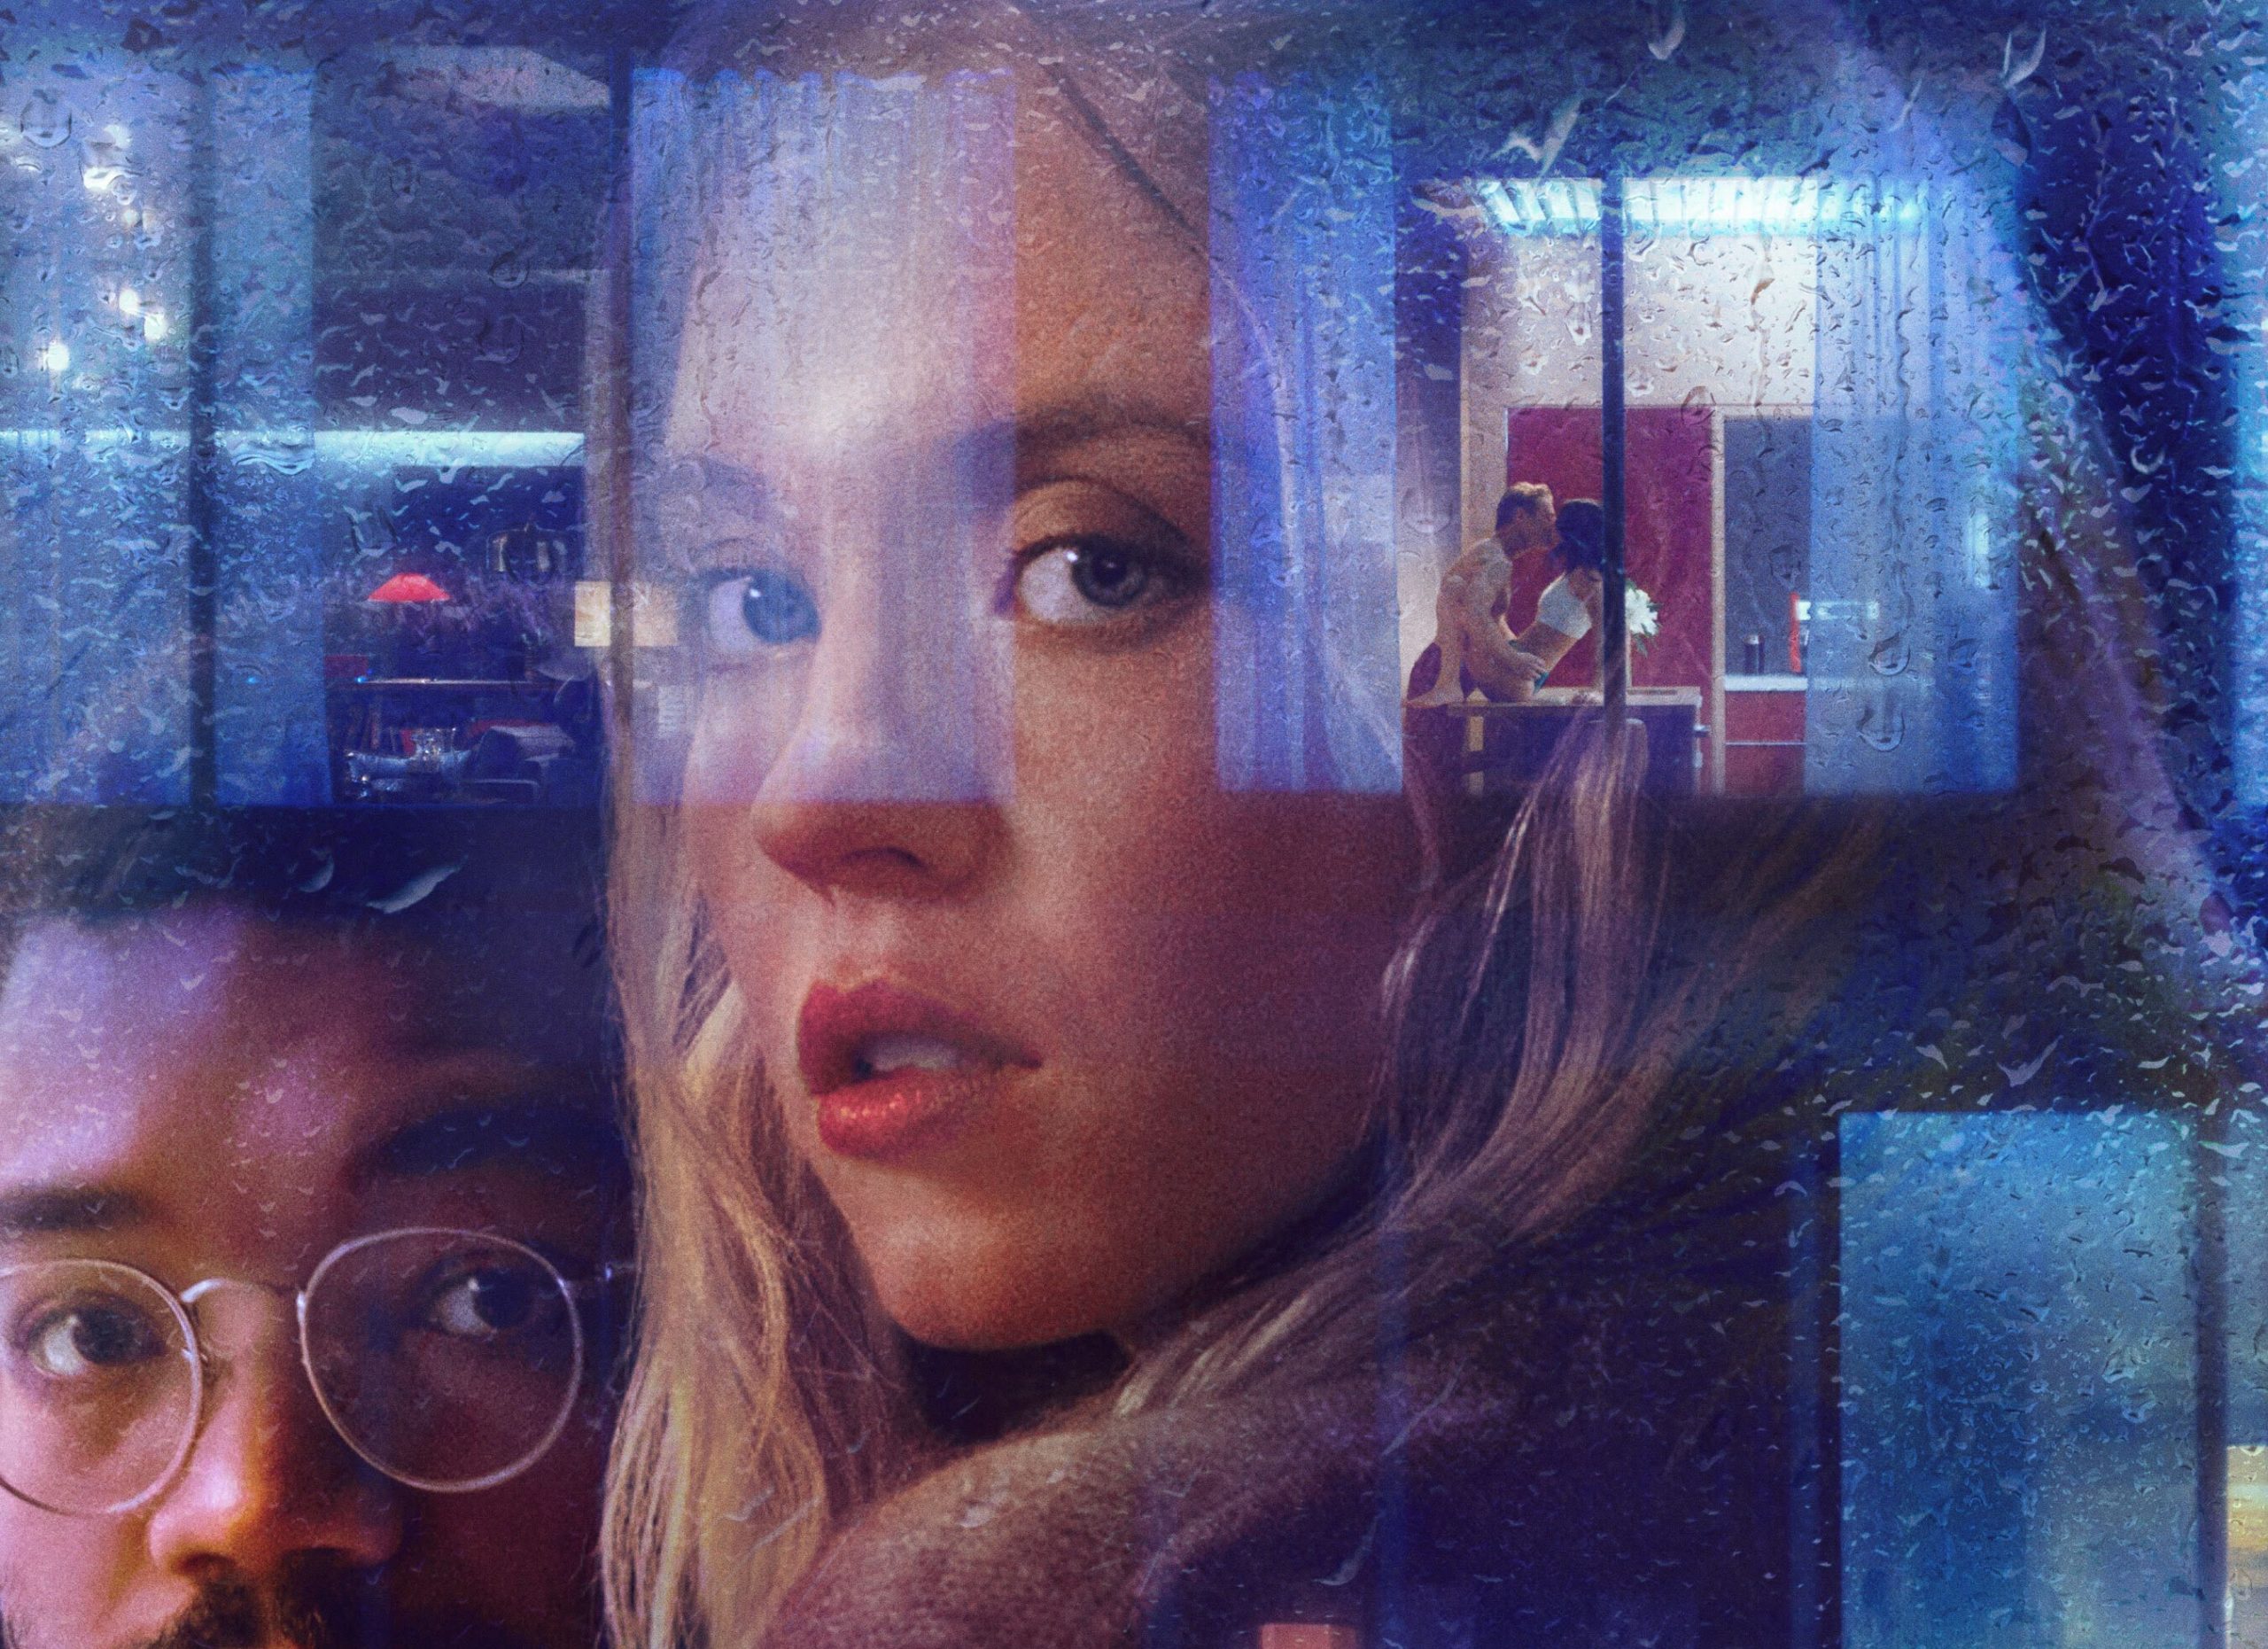 The Voyeurs starring Sydney Sweeney and Justice Smith for Amazon Studios